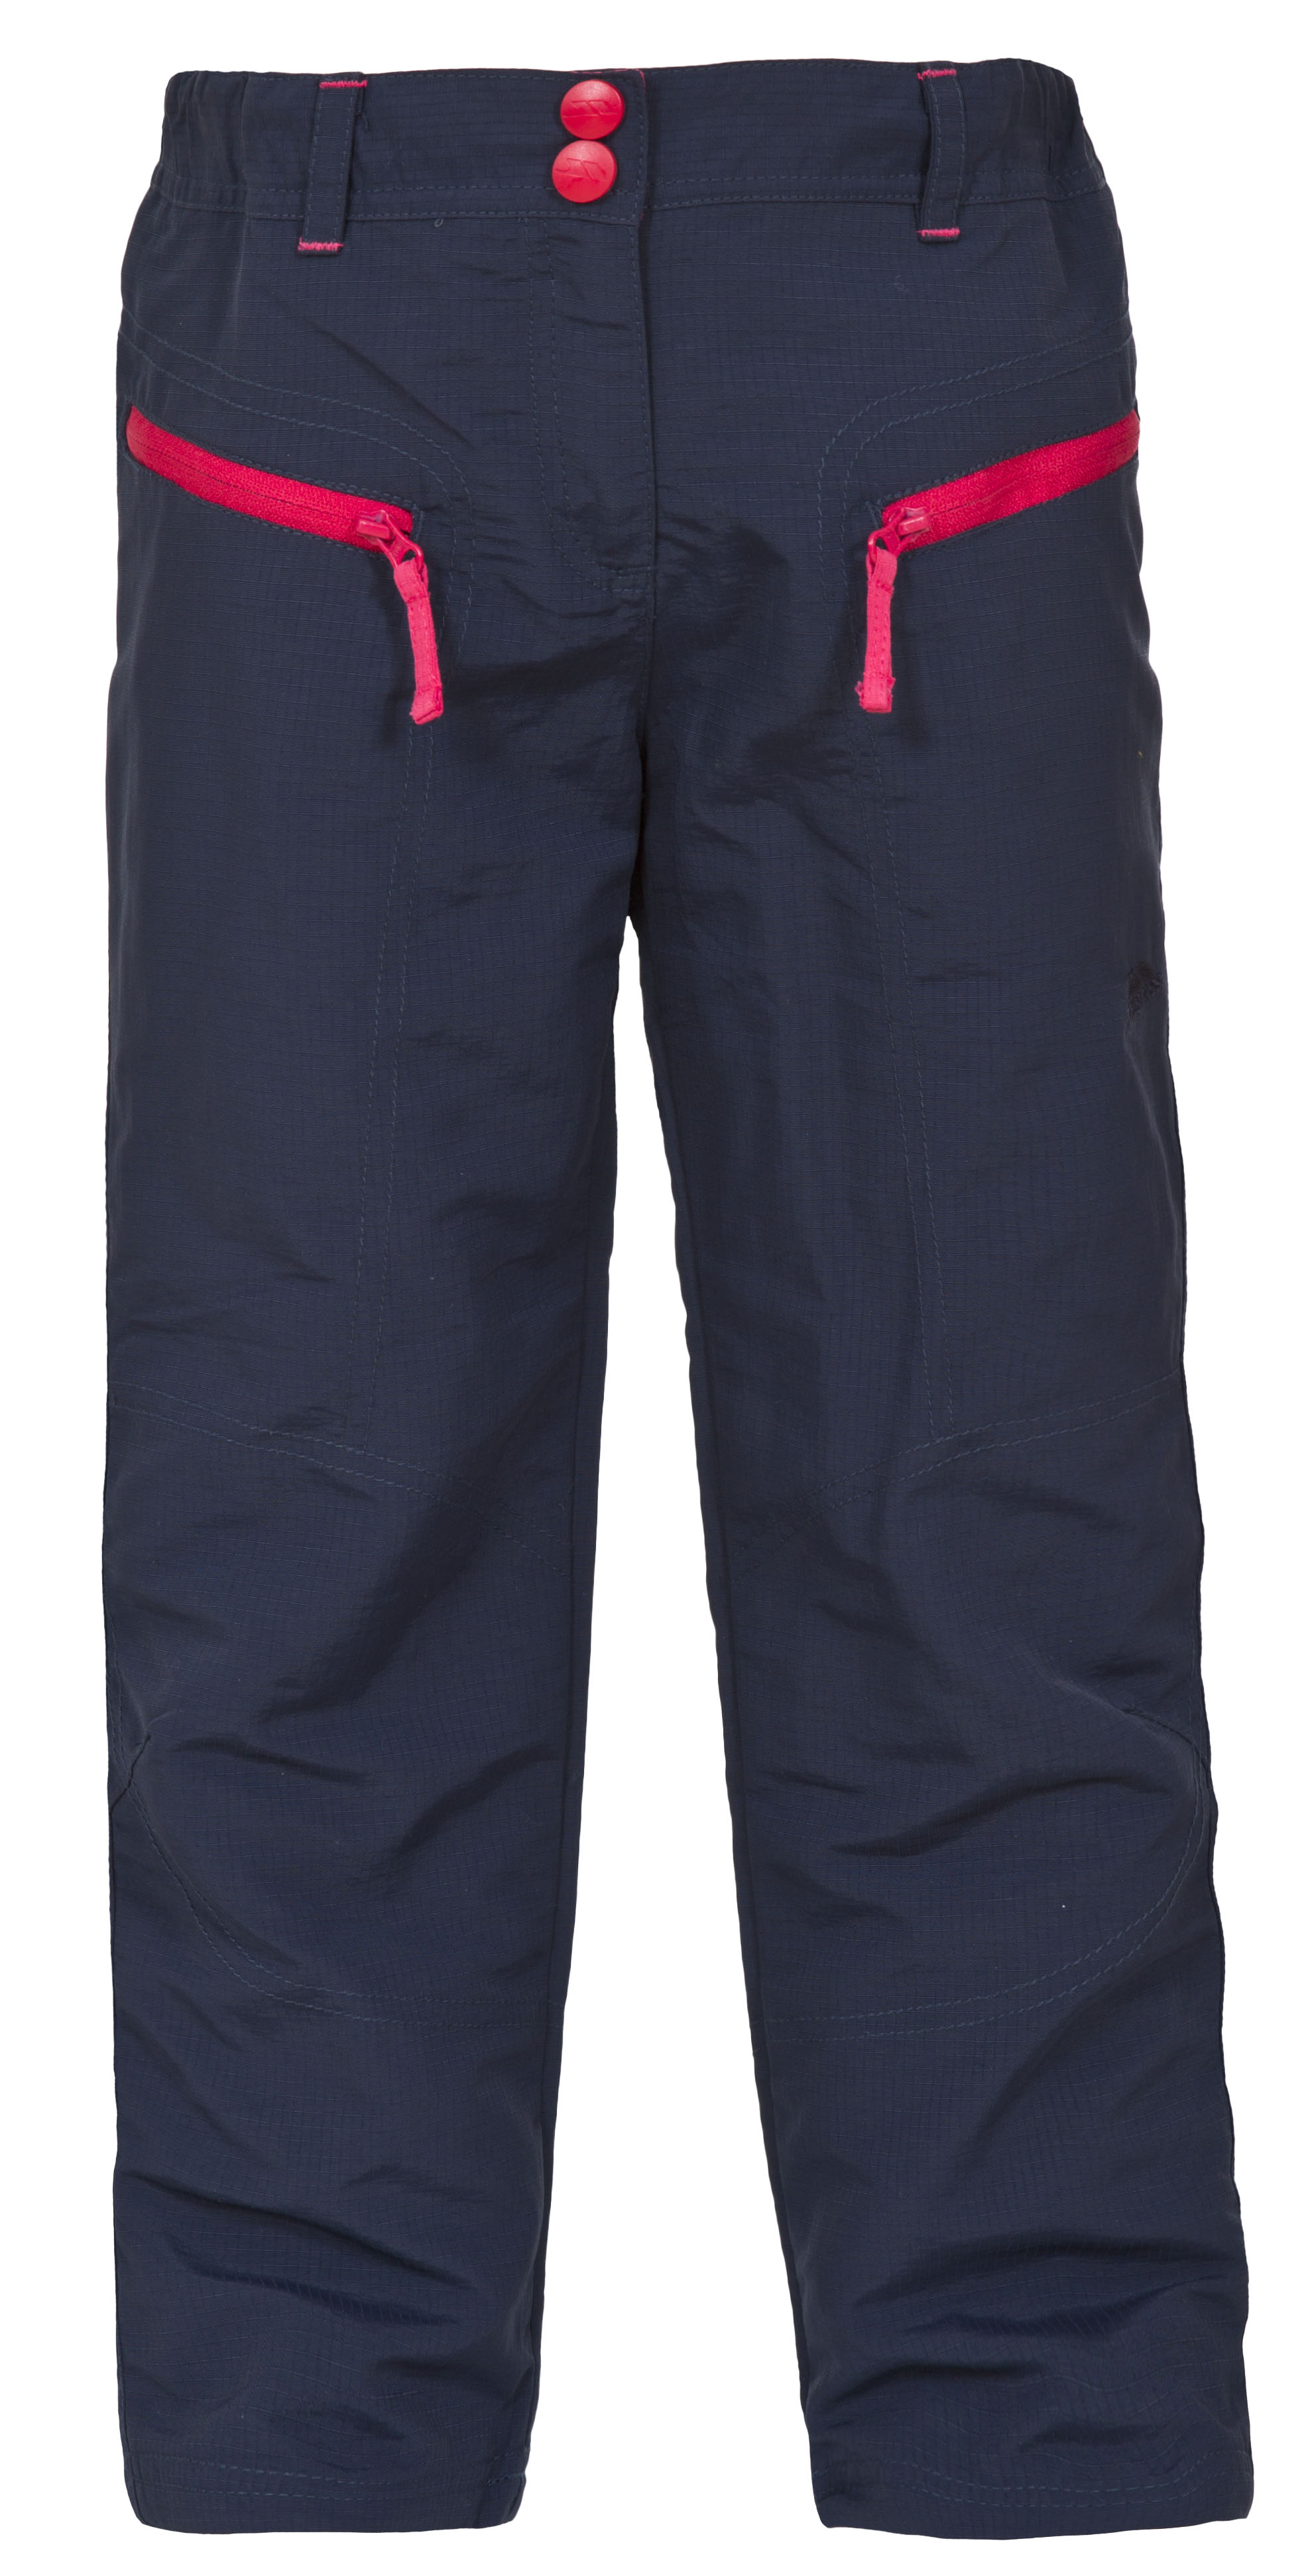 Mens Waterproof Walking Trousers DLX Ultimate Golf Putter from Trespass   Charles Hawes  Walking The Blog